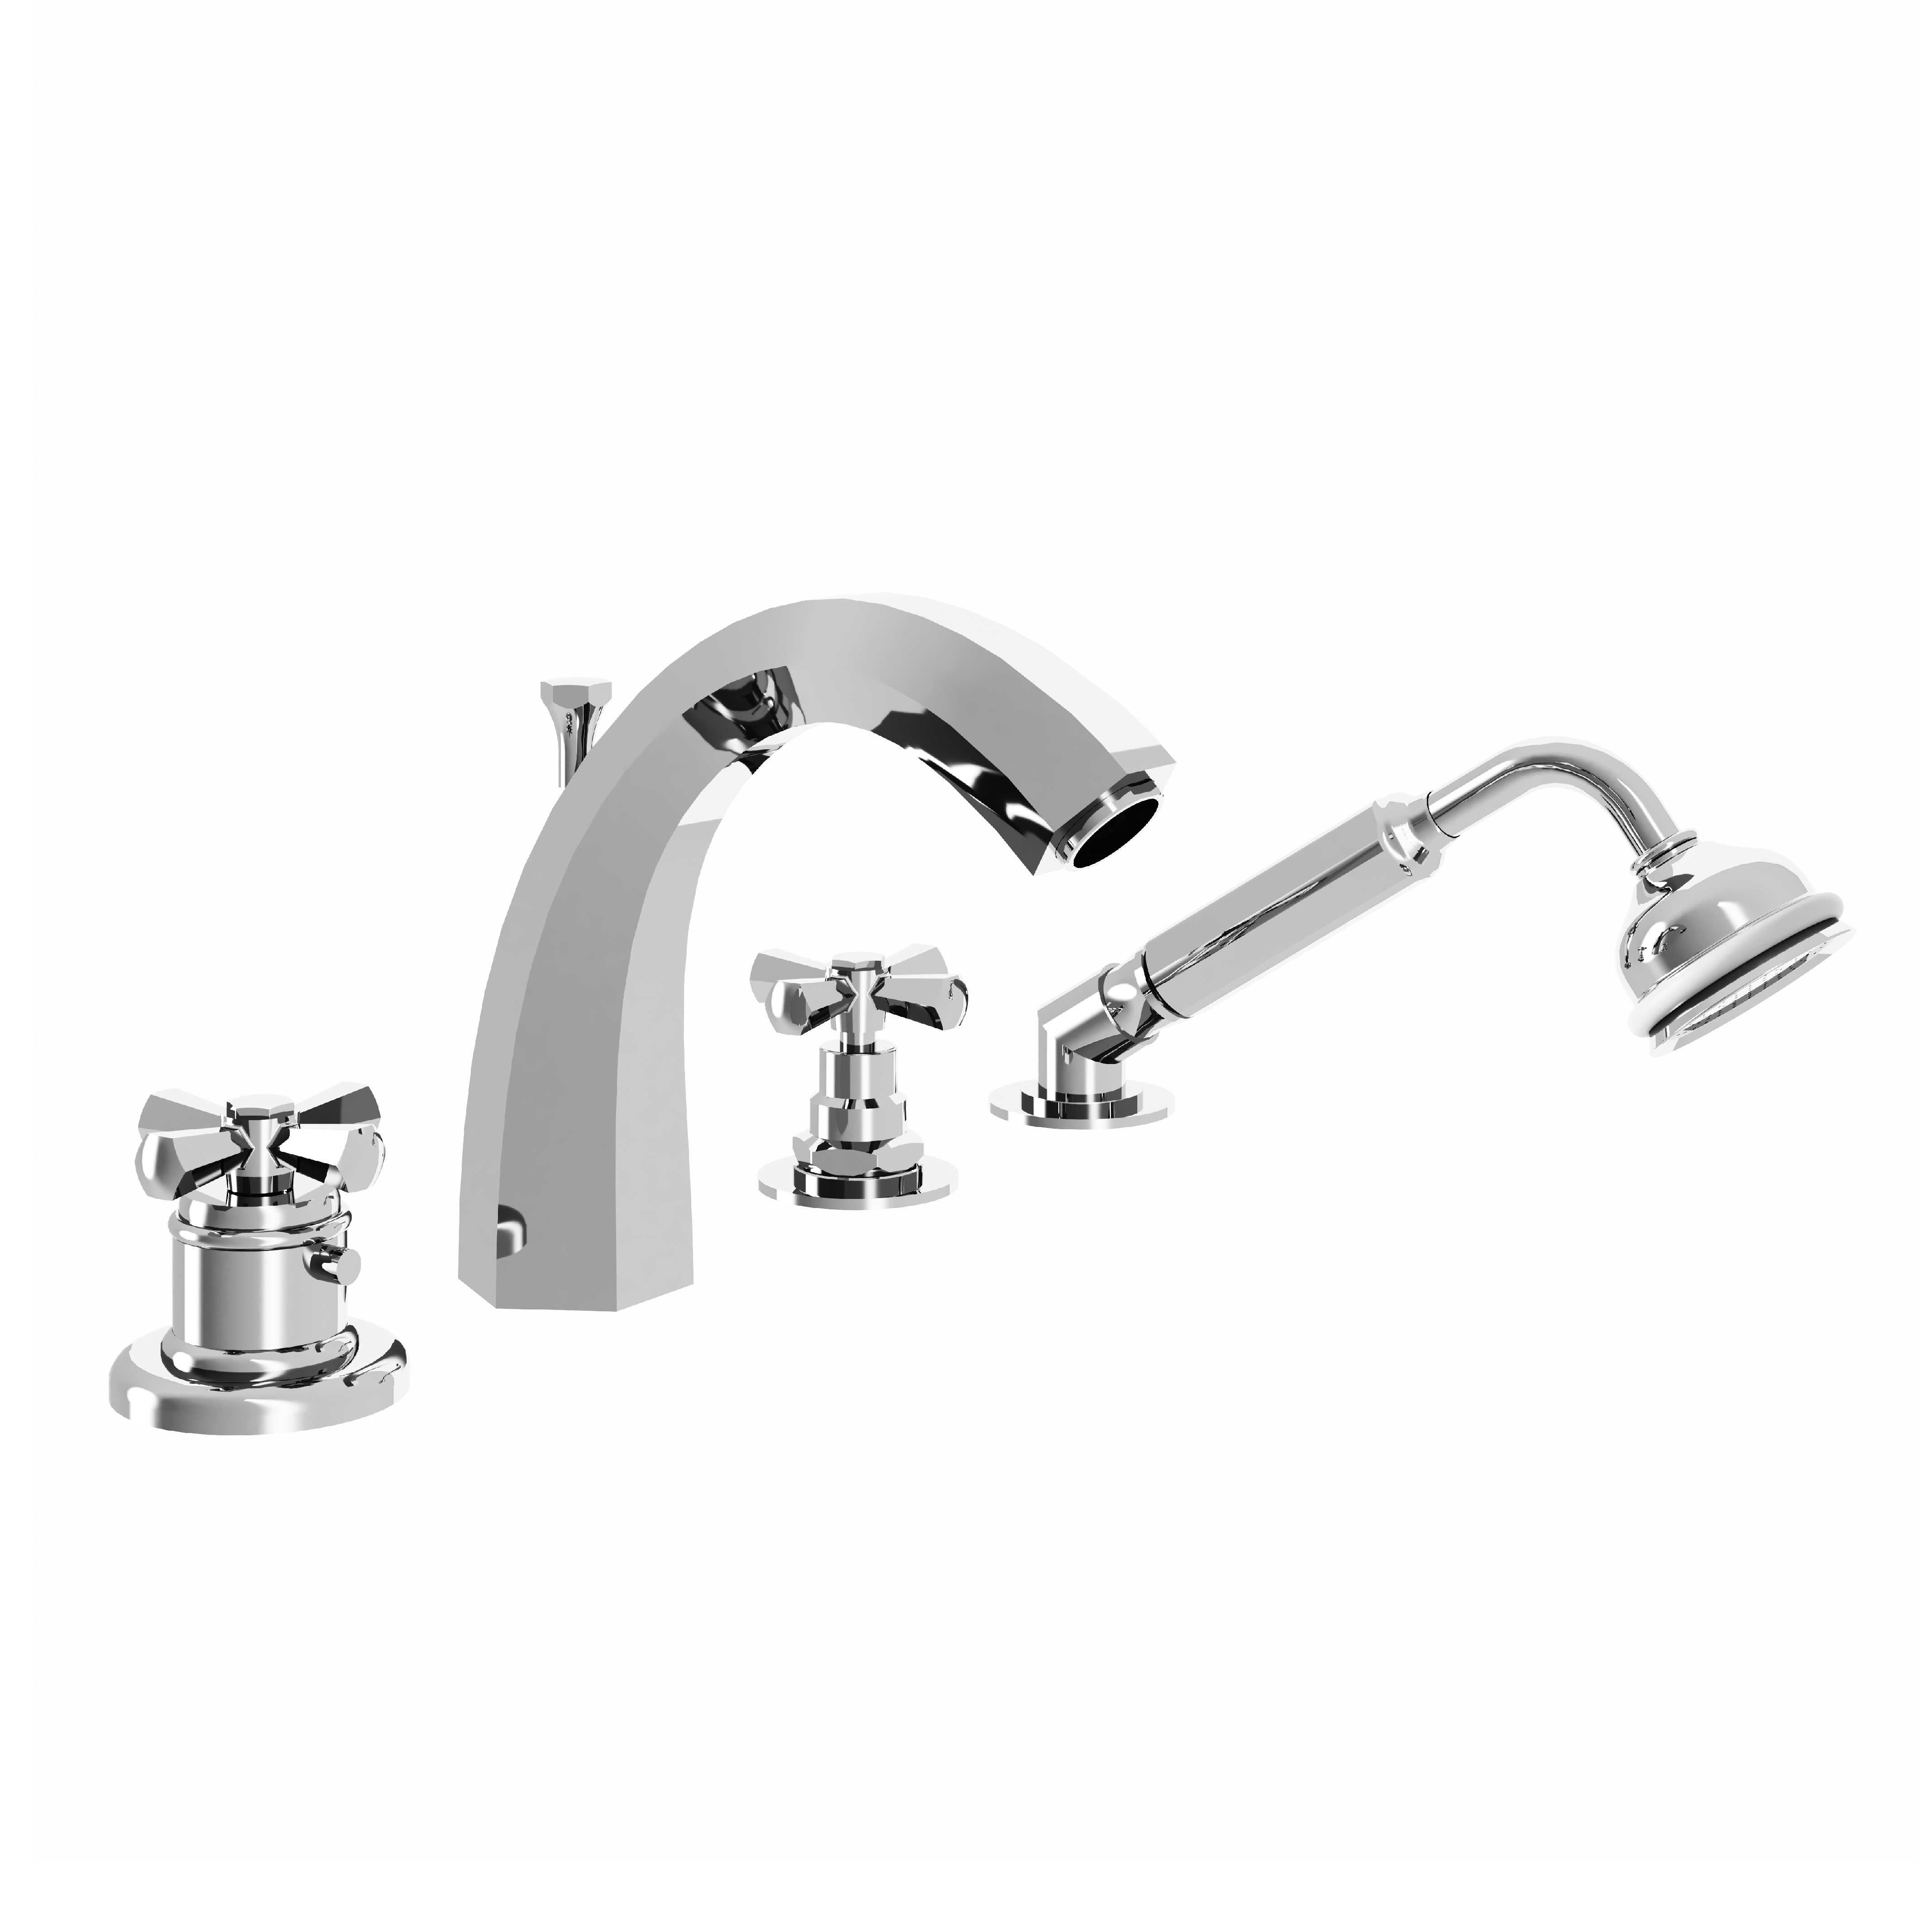 M38-3304TH 4-hole bath and shower thermo. mixer, high spout